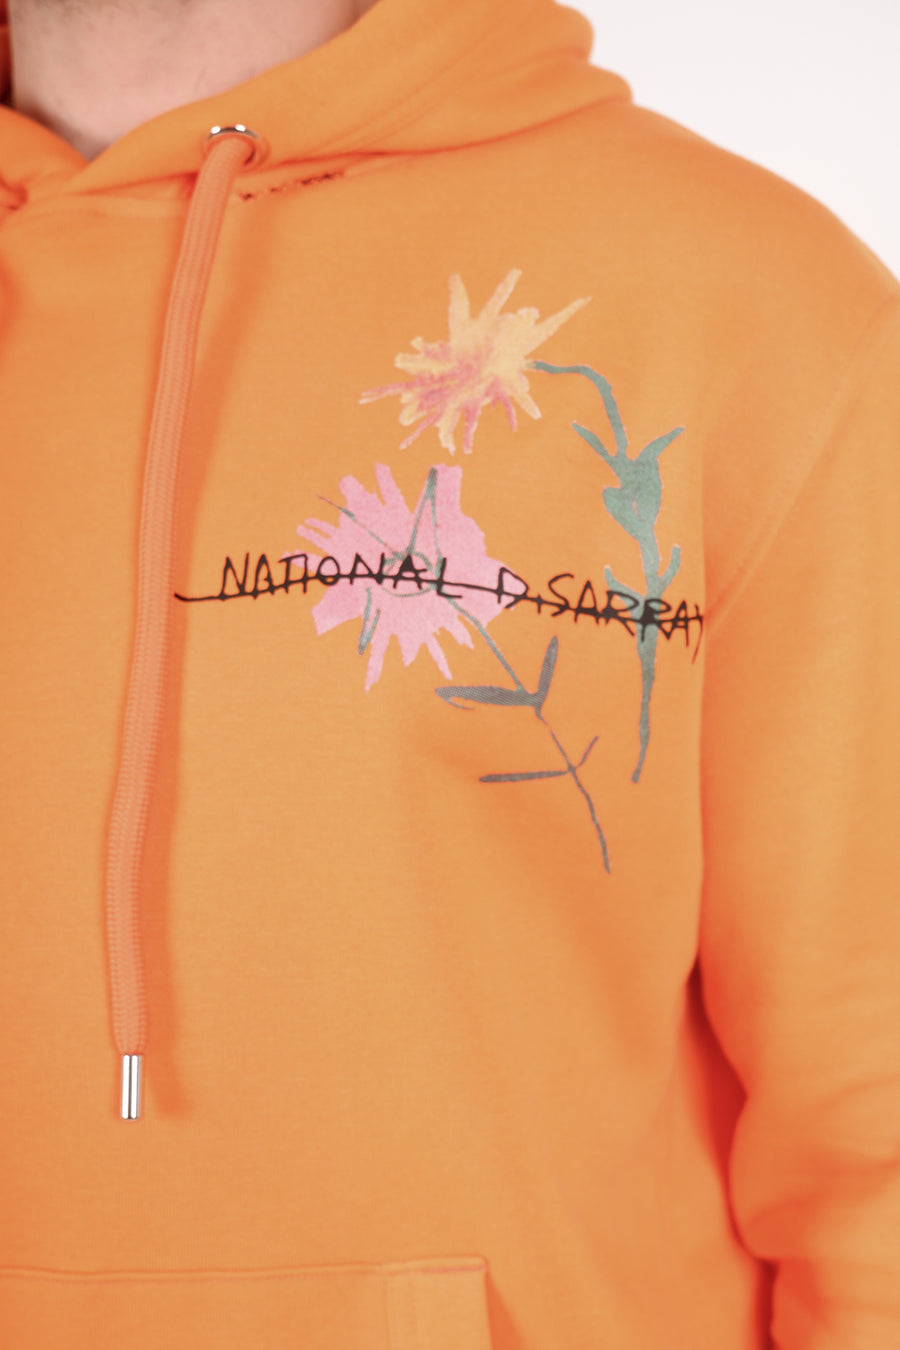 Buy the ABE Basquiat National Disarray Hoodie in Orange at Intro. Spend £50 for free UK delivery. Official stockists. We ship worldwide.